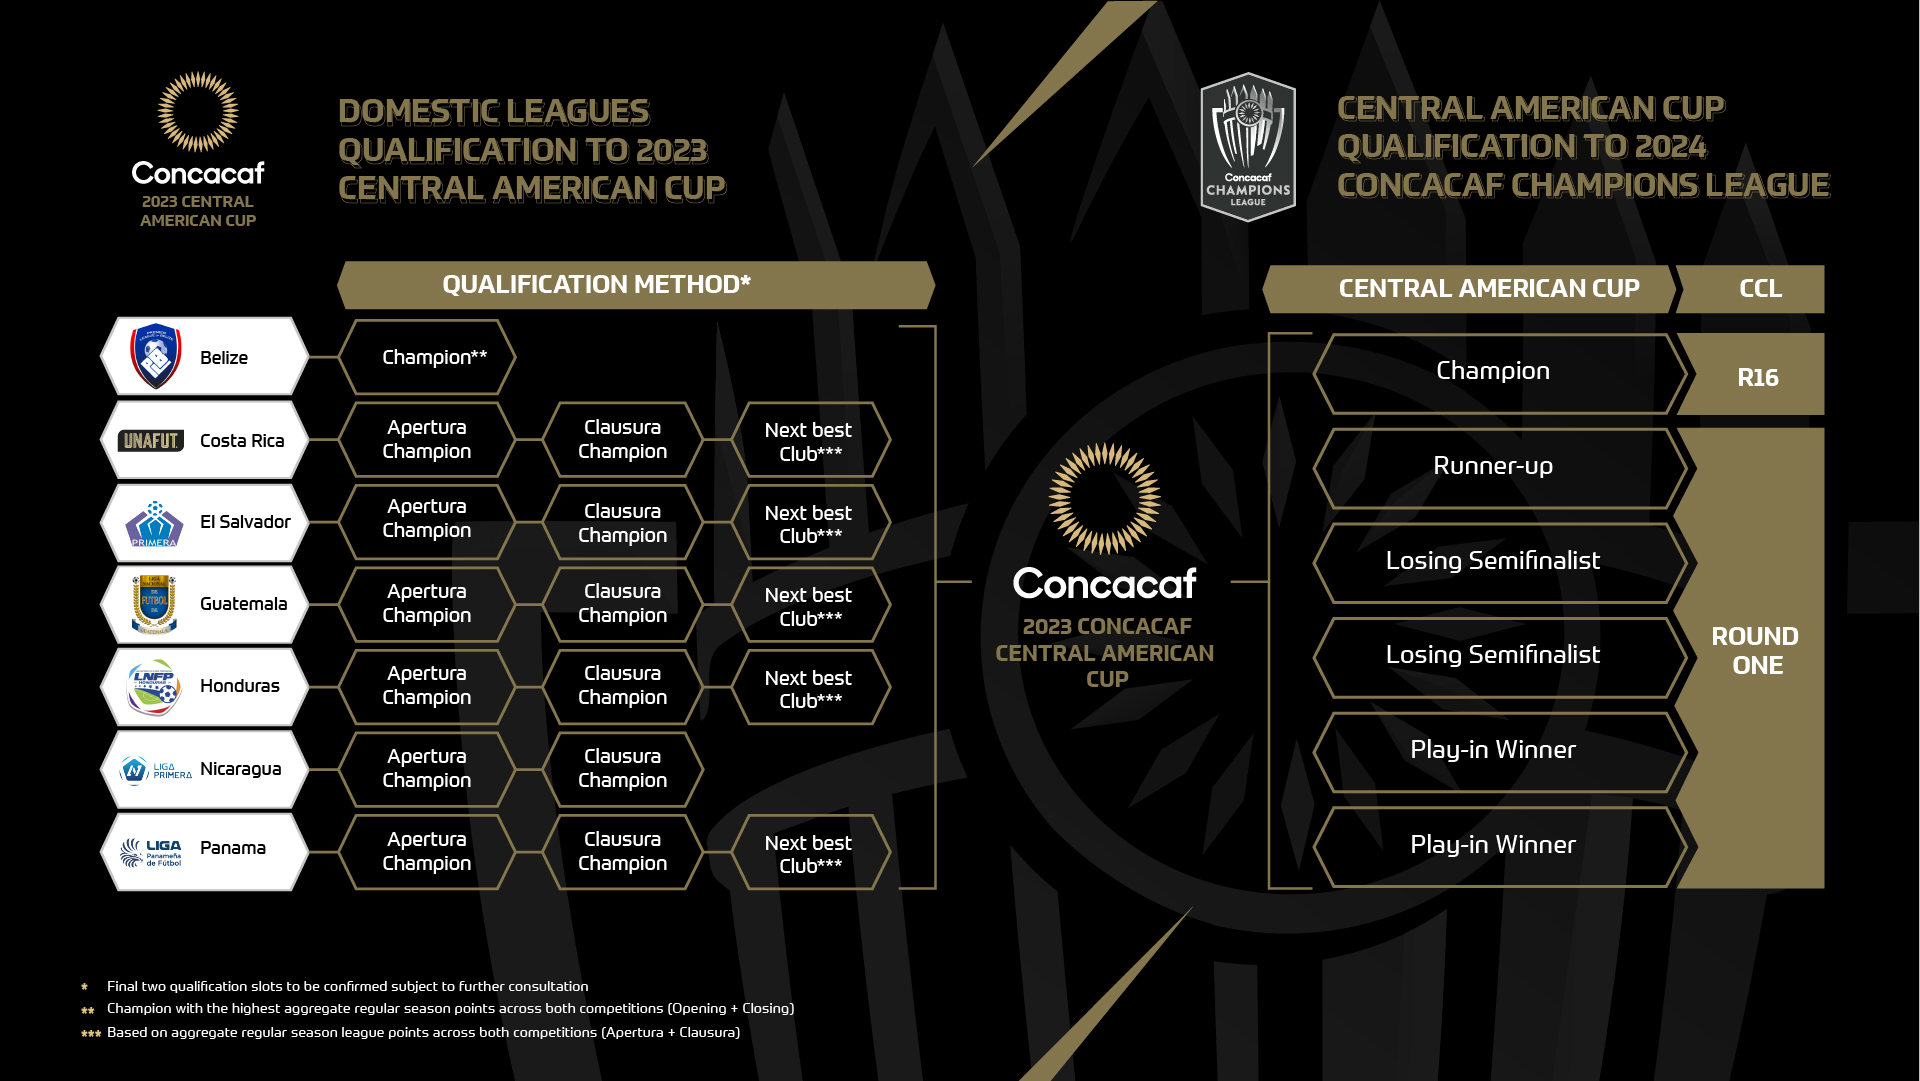 Concacaf announces qualification criteria for expanded 2024 Champions